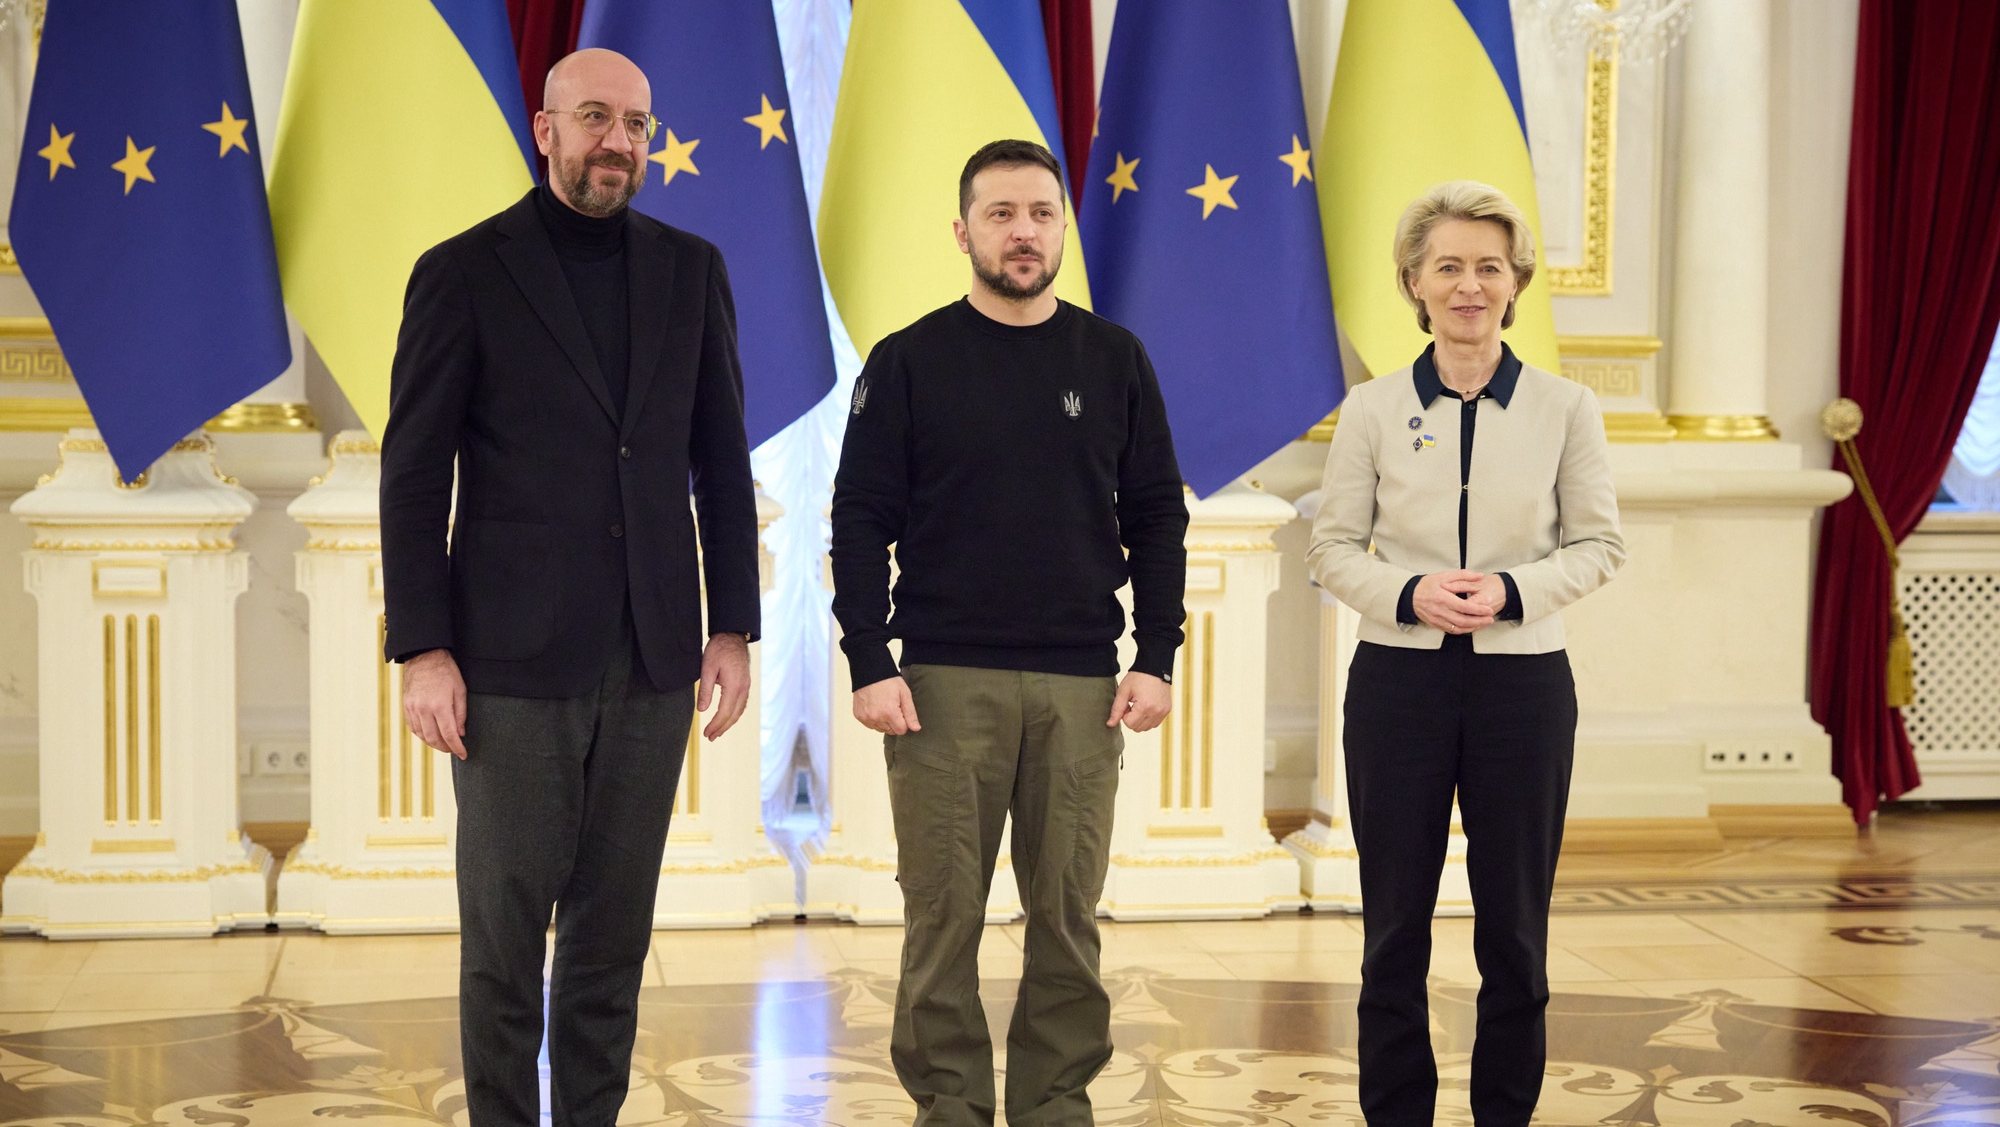 epa10445798 A handout photo made available by the Ukrainian Presidential Press Service shows (L-R) European Council President Charles Michel, Ukraine&#039;s President Volodymyr Zelensky and European Commission President Ursula von der Leyen posing for a photograph during an EU-Ukraine summit in Kyiv (Kiev), Ukraine, 03 February 2023. The presidents of the European Council and European Commission, accompanied by 15 Commissioners, are visiting Kyiv to meet with Ukrainian top officials and take part in the EU-Ukraine summit, the first summit since the European Council granted Ukraine the status of EU candidate amid Russia&#039;s invasion. Ukraine applied for EU membership in February 2022 and was granted EU candidate status in June 2022.  EPA/UKRAINIAN PRESIDENTIAL PRESS SERVICE HANDOUT -- MANDATORY CREDIT: UKRAINIAN PRESIDENTIAL PRESS SERVICE -- HANDOUT EDITORIAL USE ONLY/NO SALES